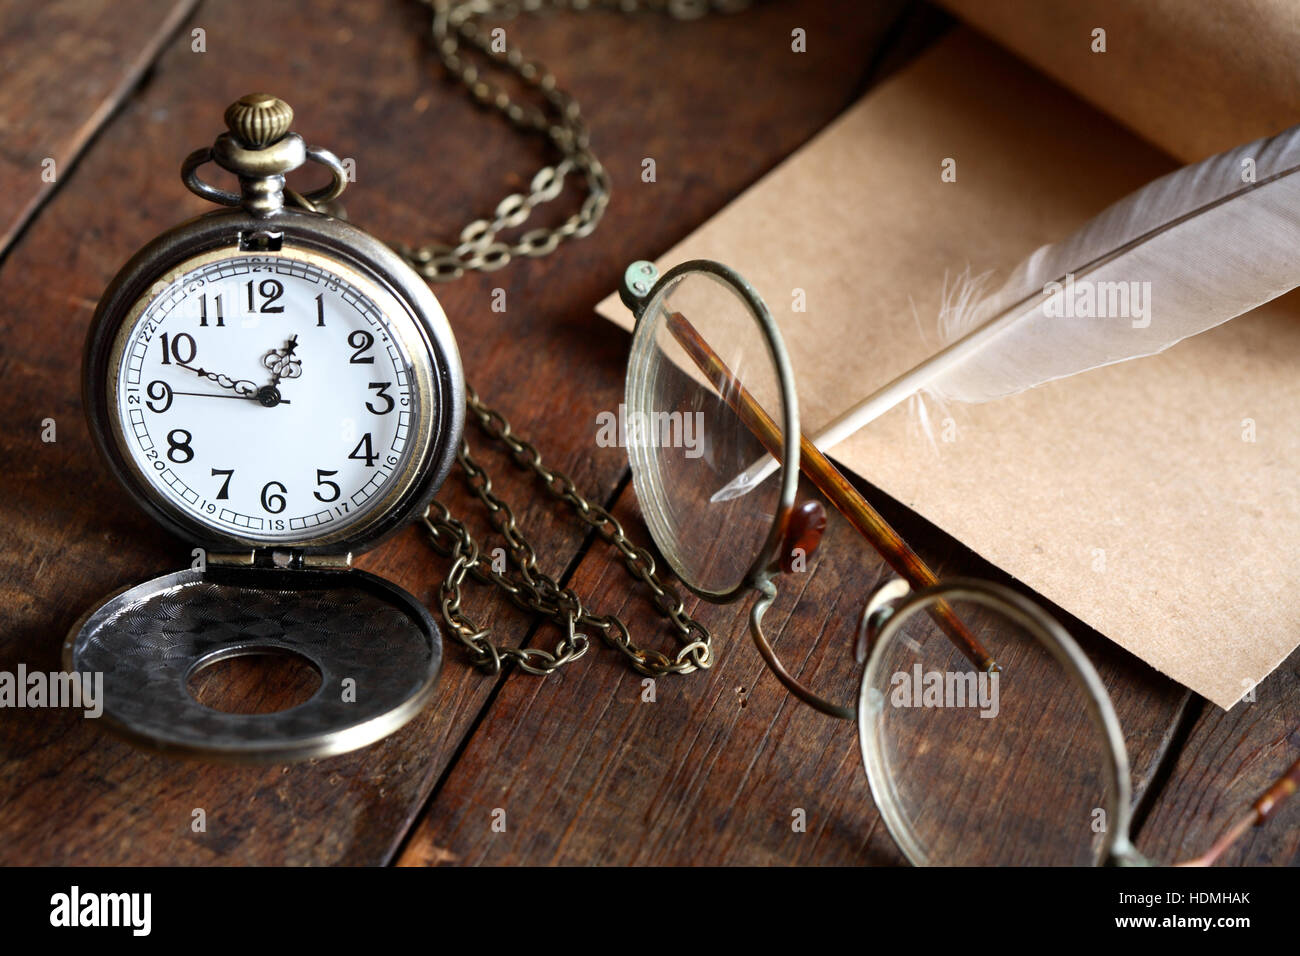 Old spectacles near watch and feather on nice old wooden background Stock Photo